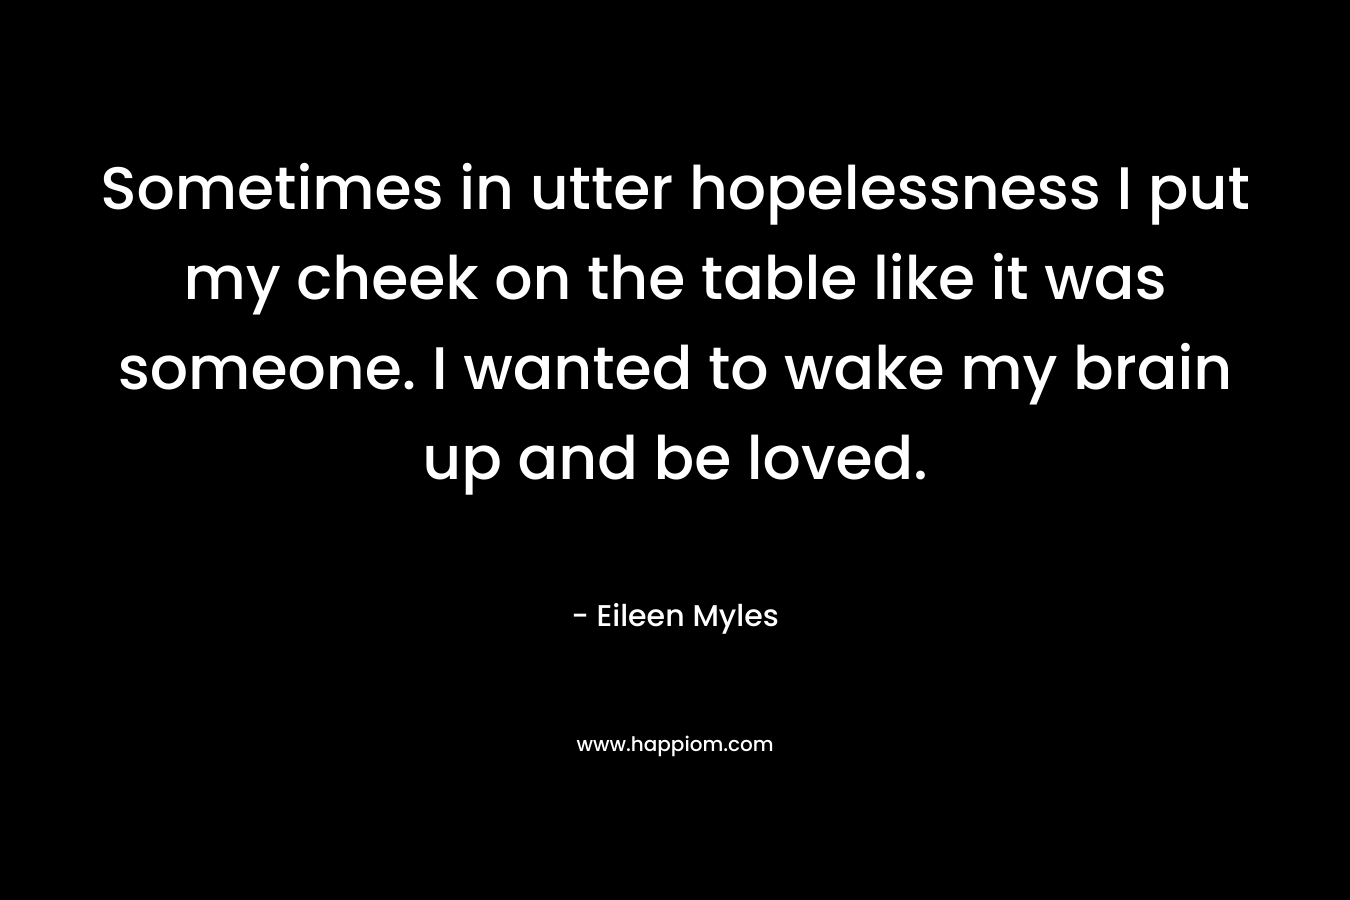 Sometimes in utter hopelessness I put my cheek on the table like it was someone. I wanted to wake my brain up and be loved. – Eileen Myles